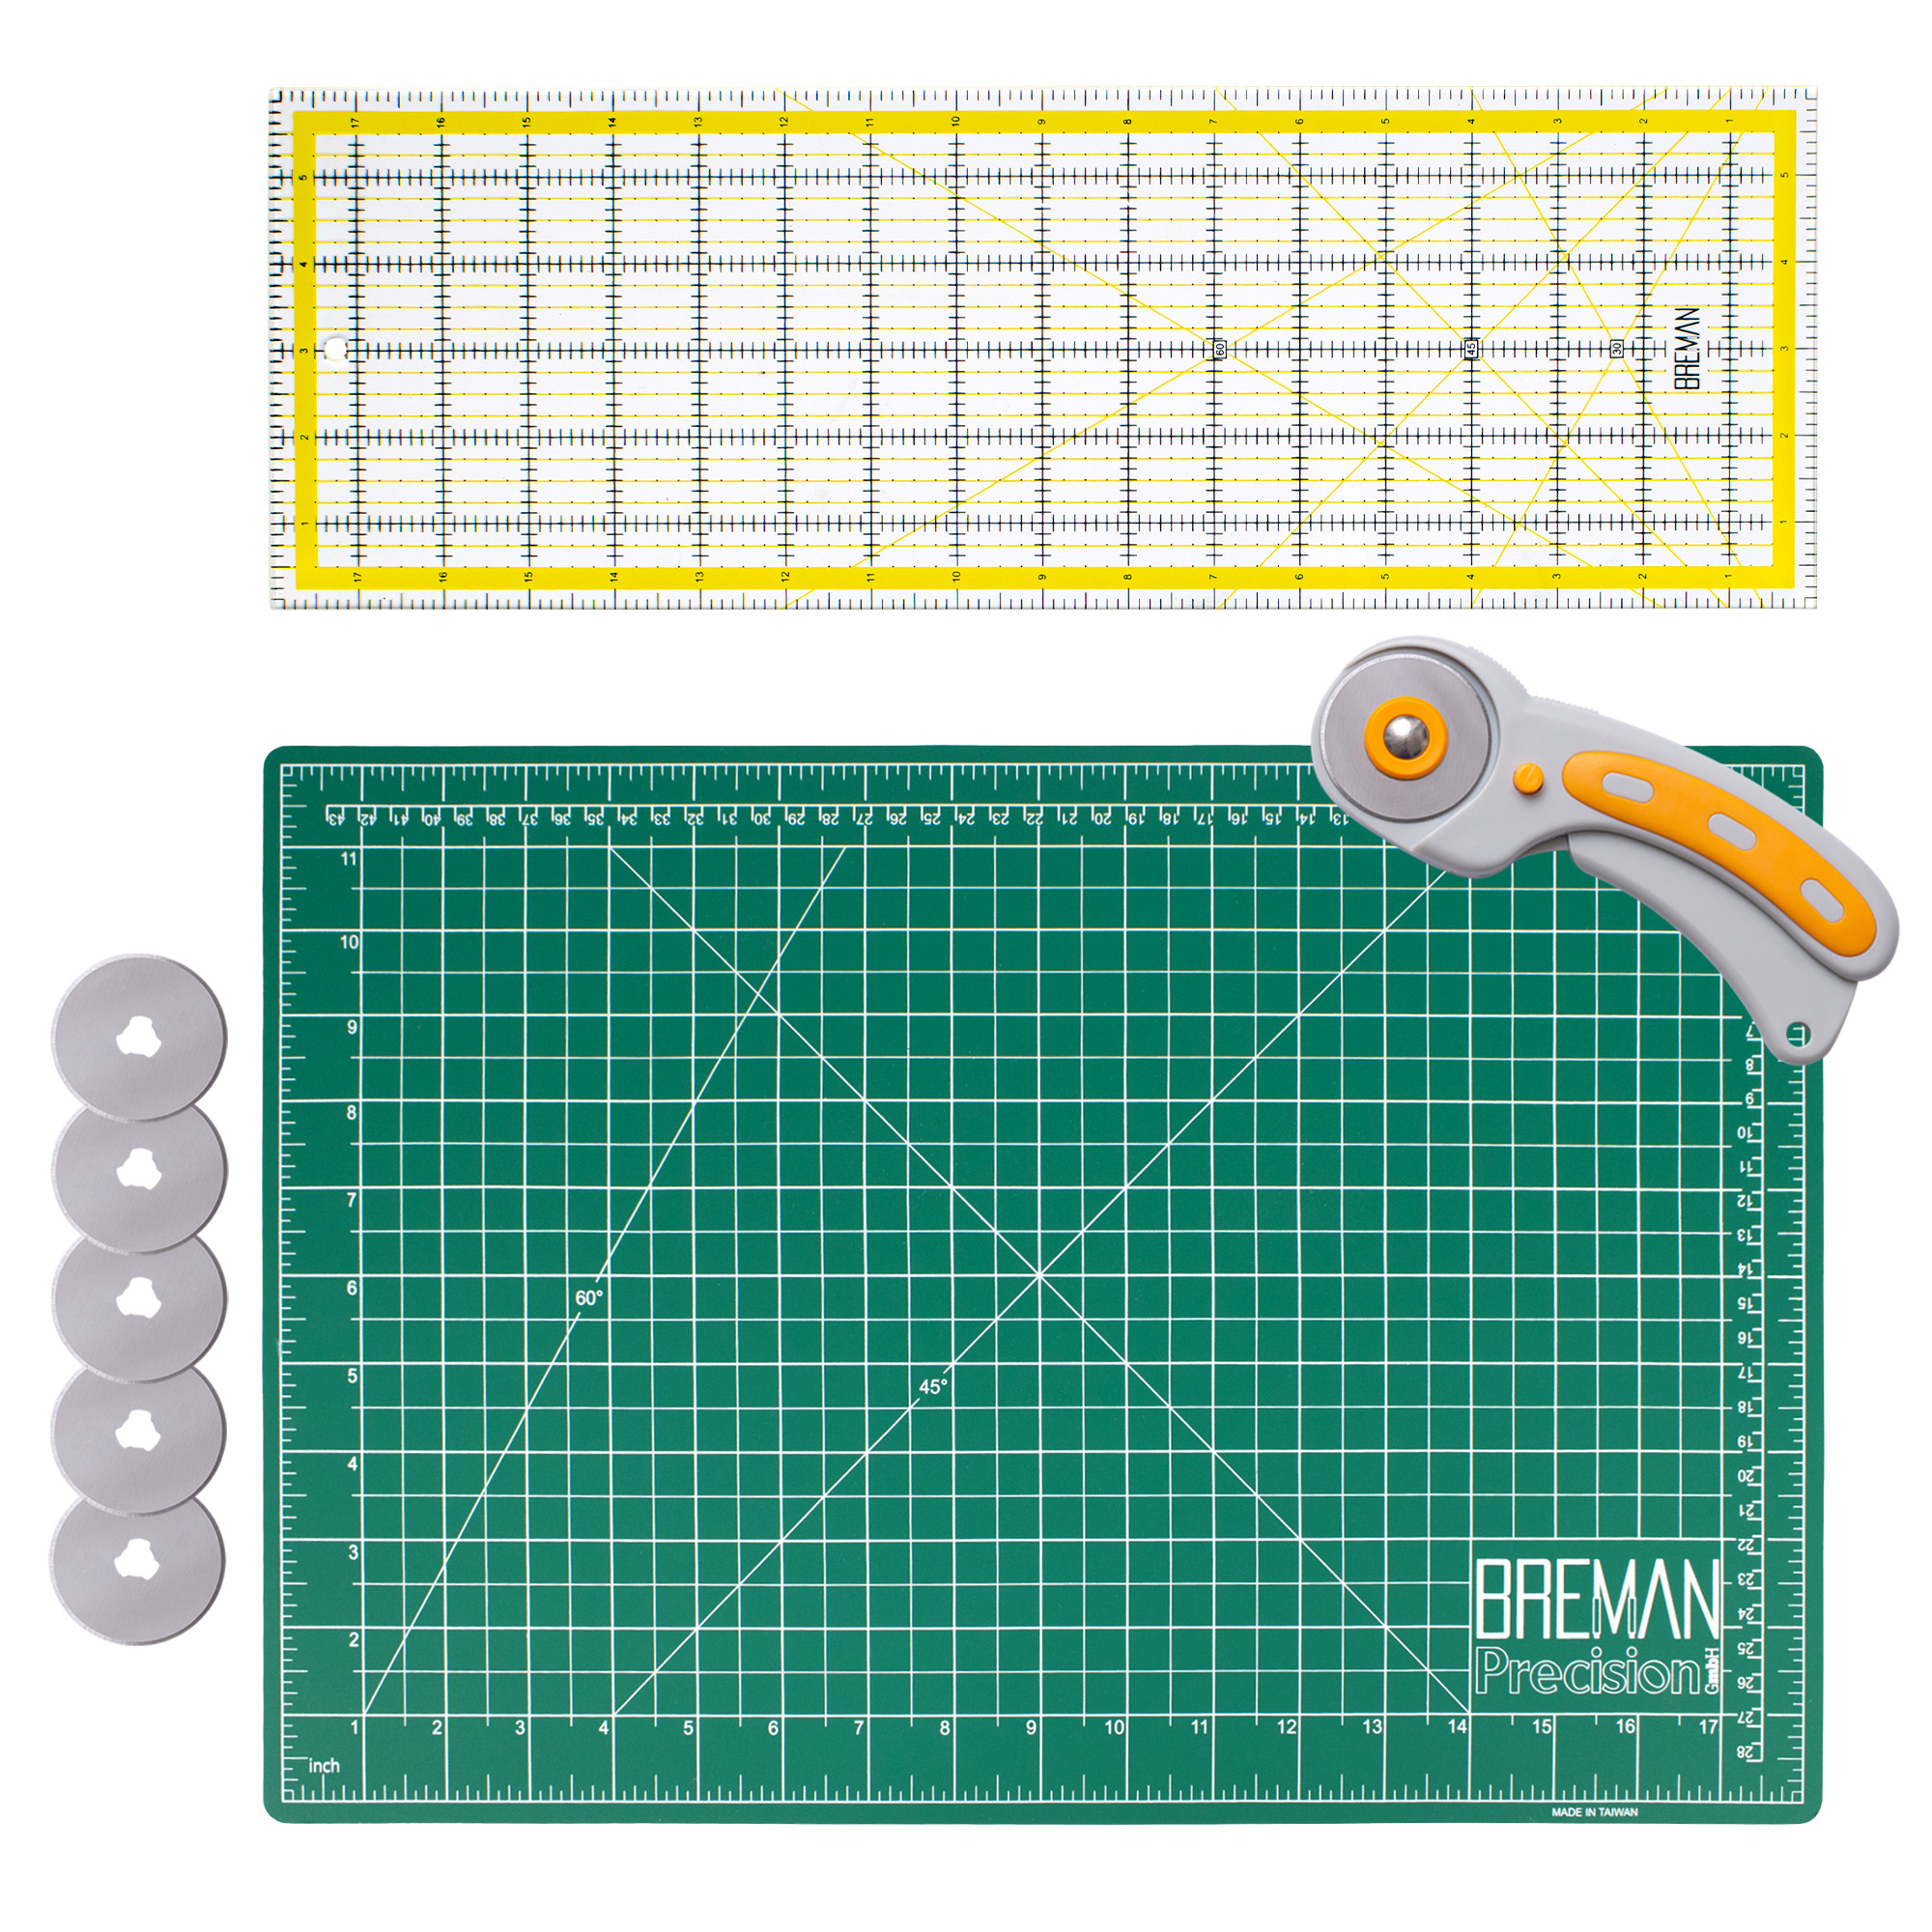 Ruler Guide Alignment Tool for Diamond Painting